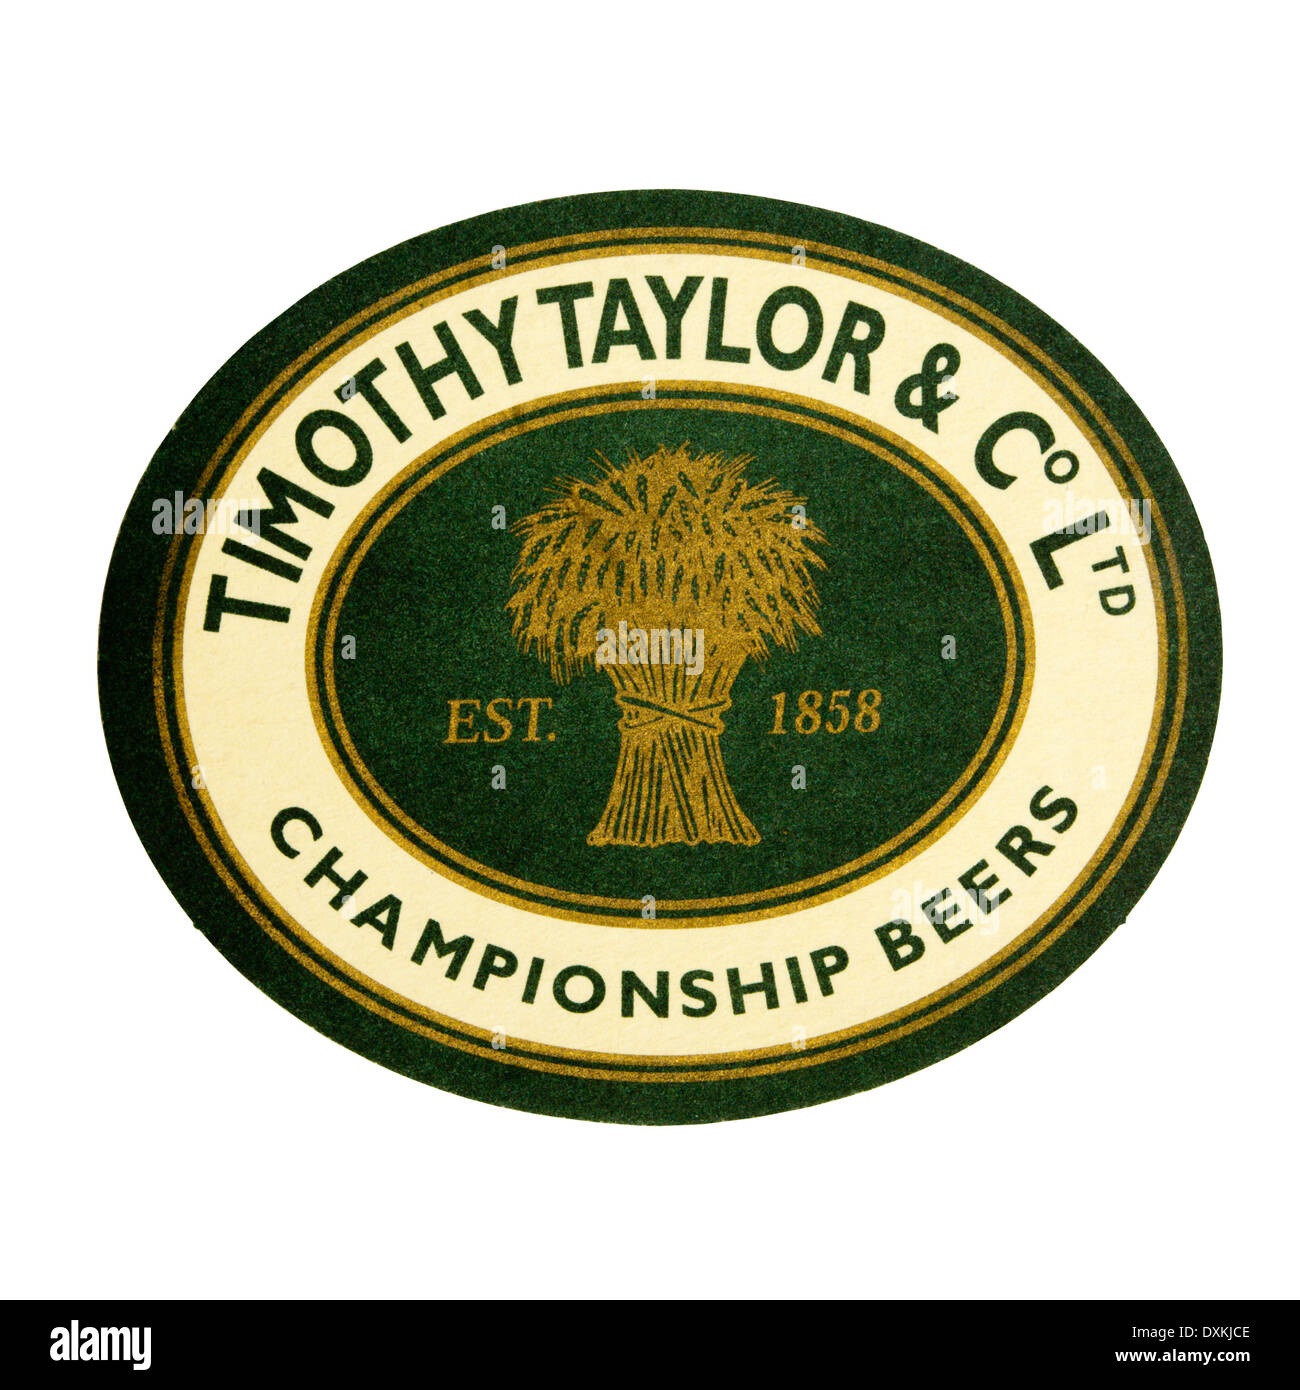 A beer mat advertising Timothy Taylor & Co Ltd Championship Beers. Stock Photo